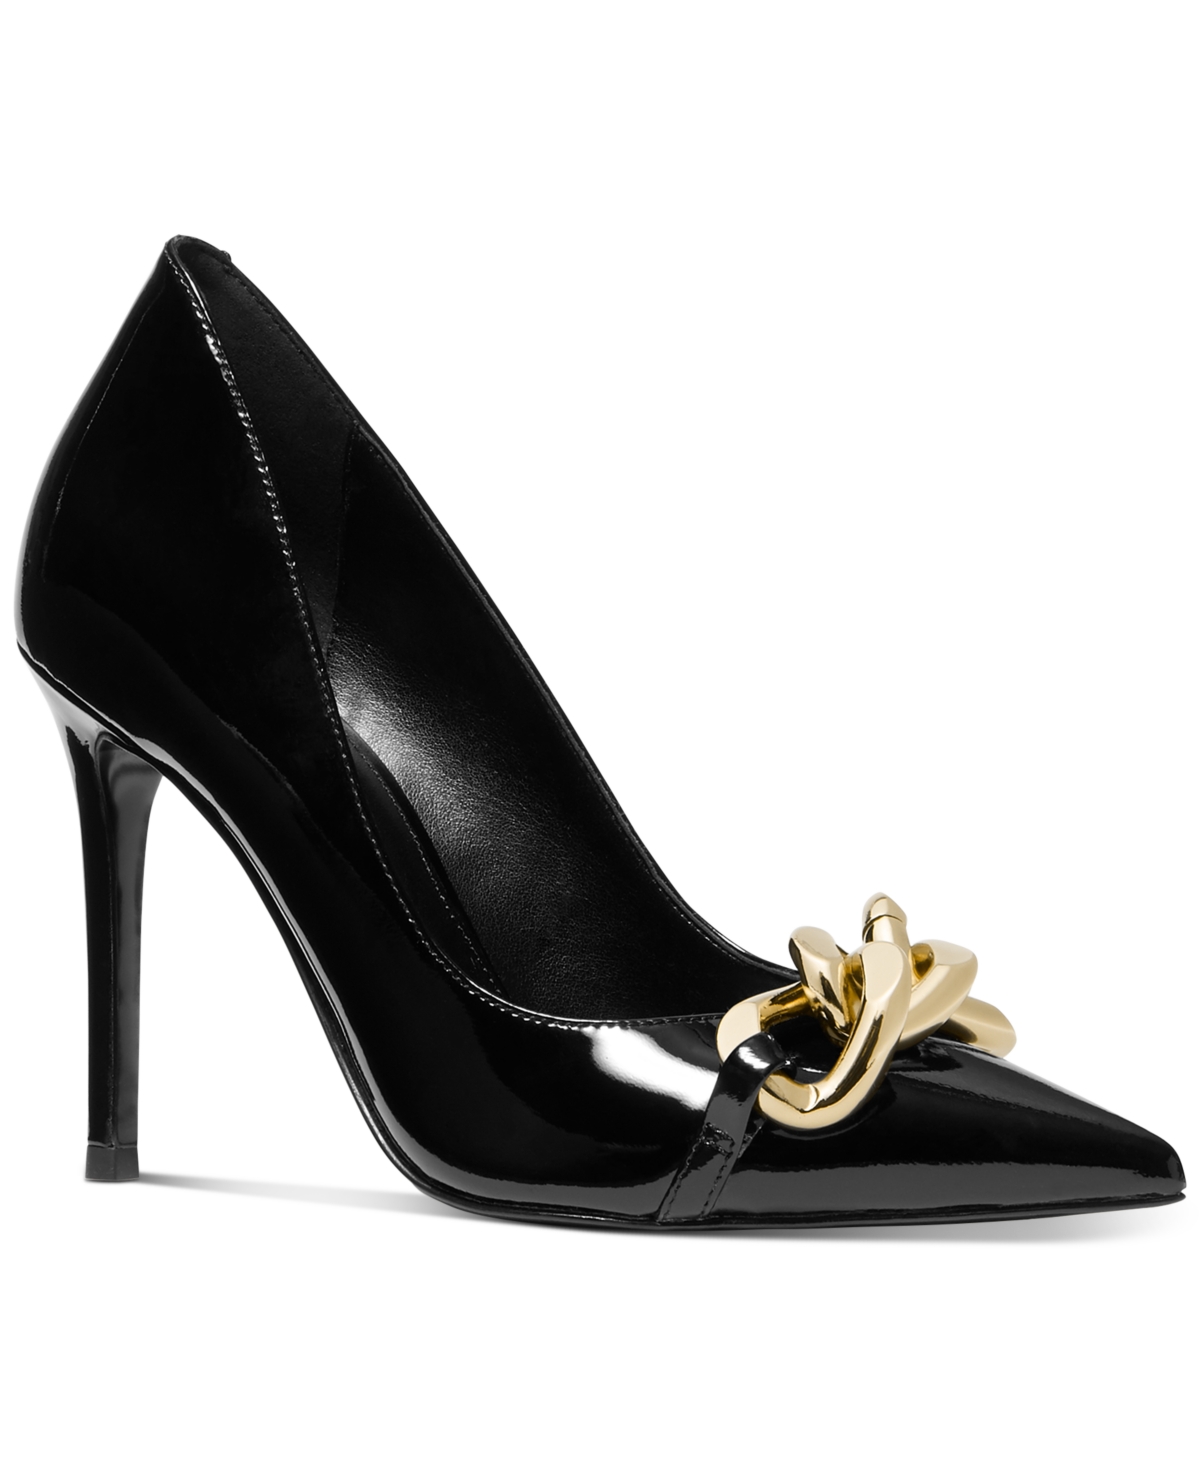 UPC 195512621178 product image for Michael Michael Kors Women's Scarlett Pointed-Toe Chain Pumps Women's Shoes | upcitemdb.com